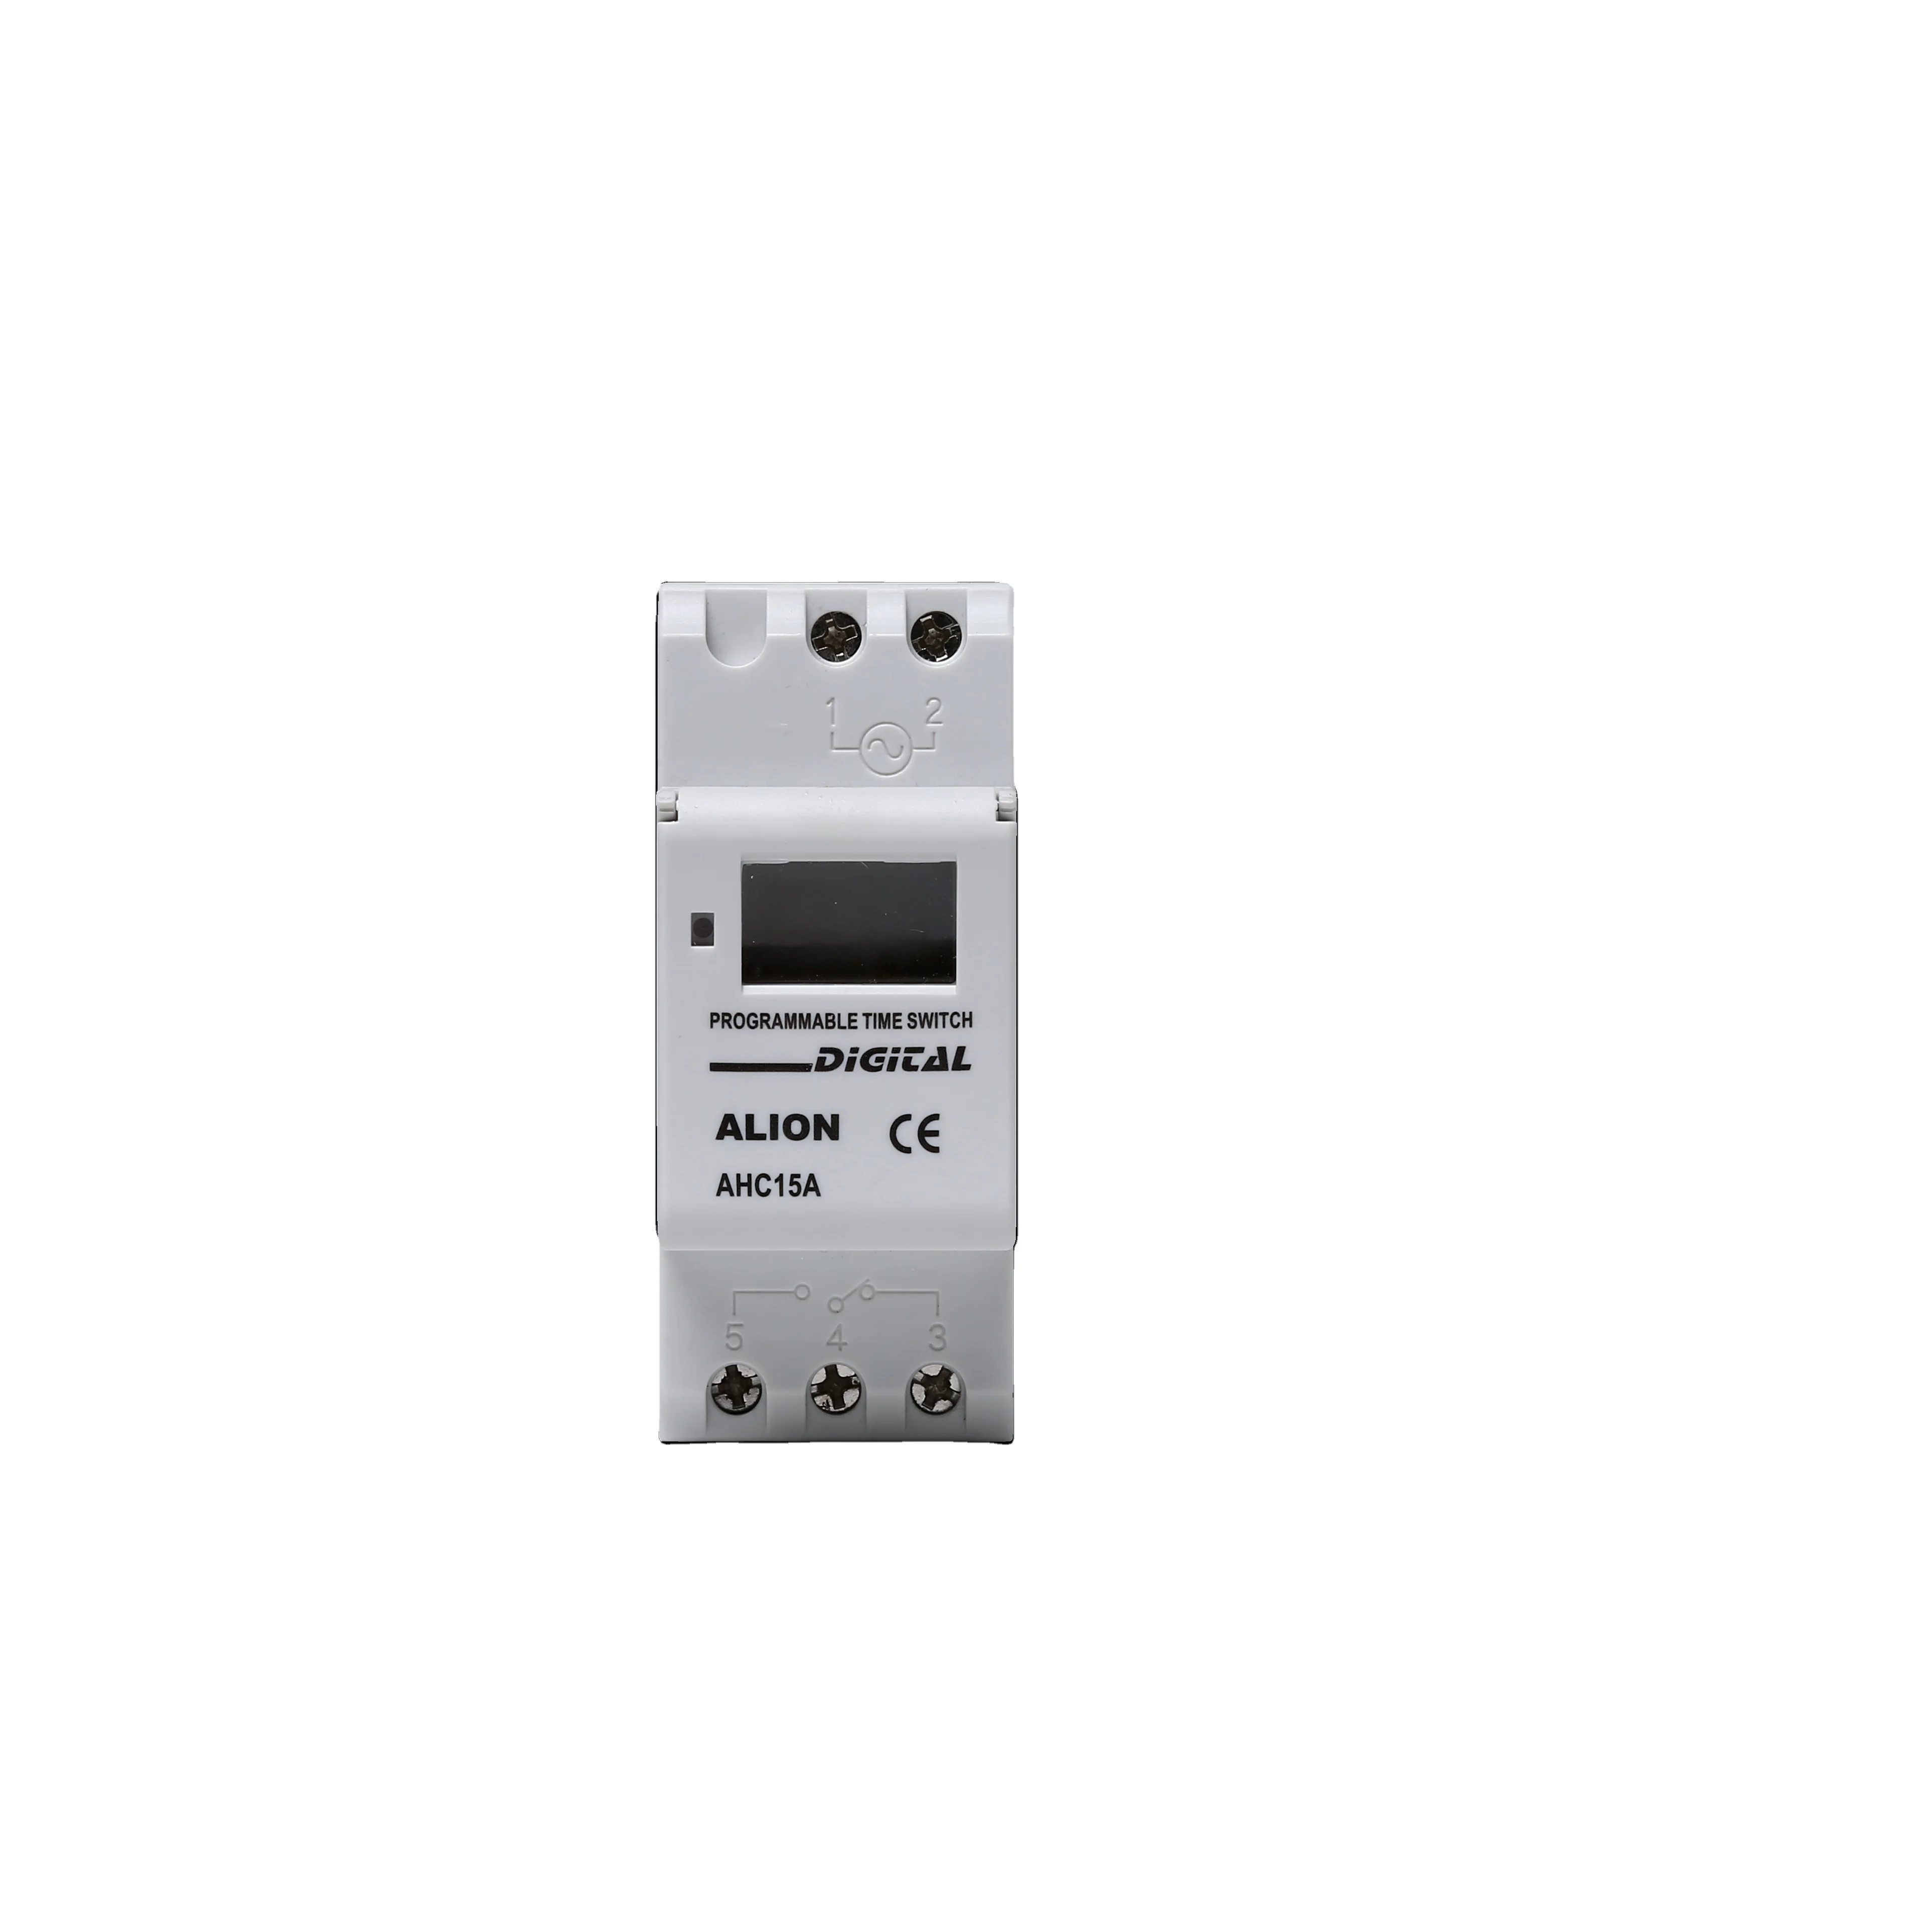 ALION AHC16TOP 230 240VAC 50 60Hz Weekly Program Locations DIN Rail LCD Digital Table Time Switch (1600400450996)